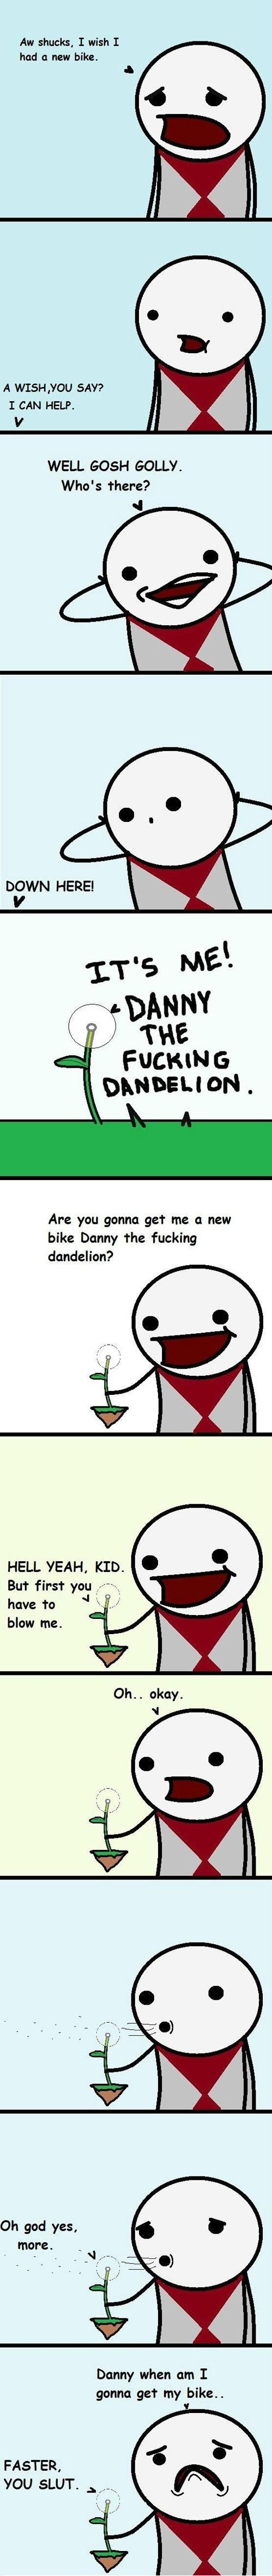 Everyone knows it's danny!